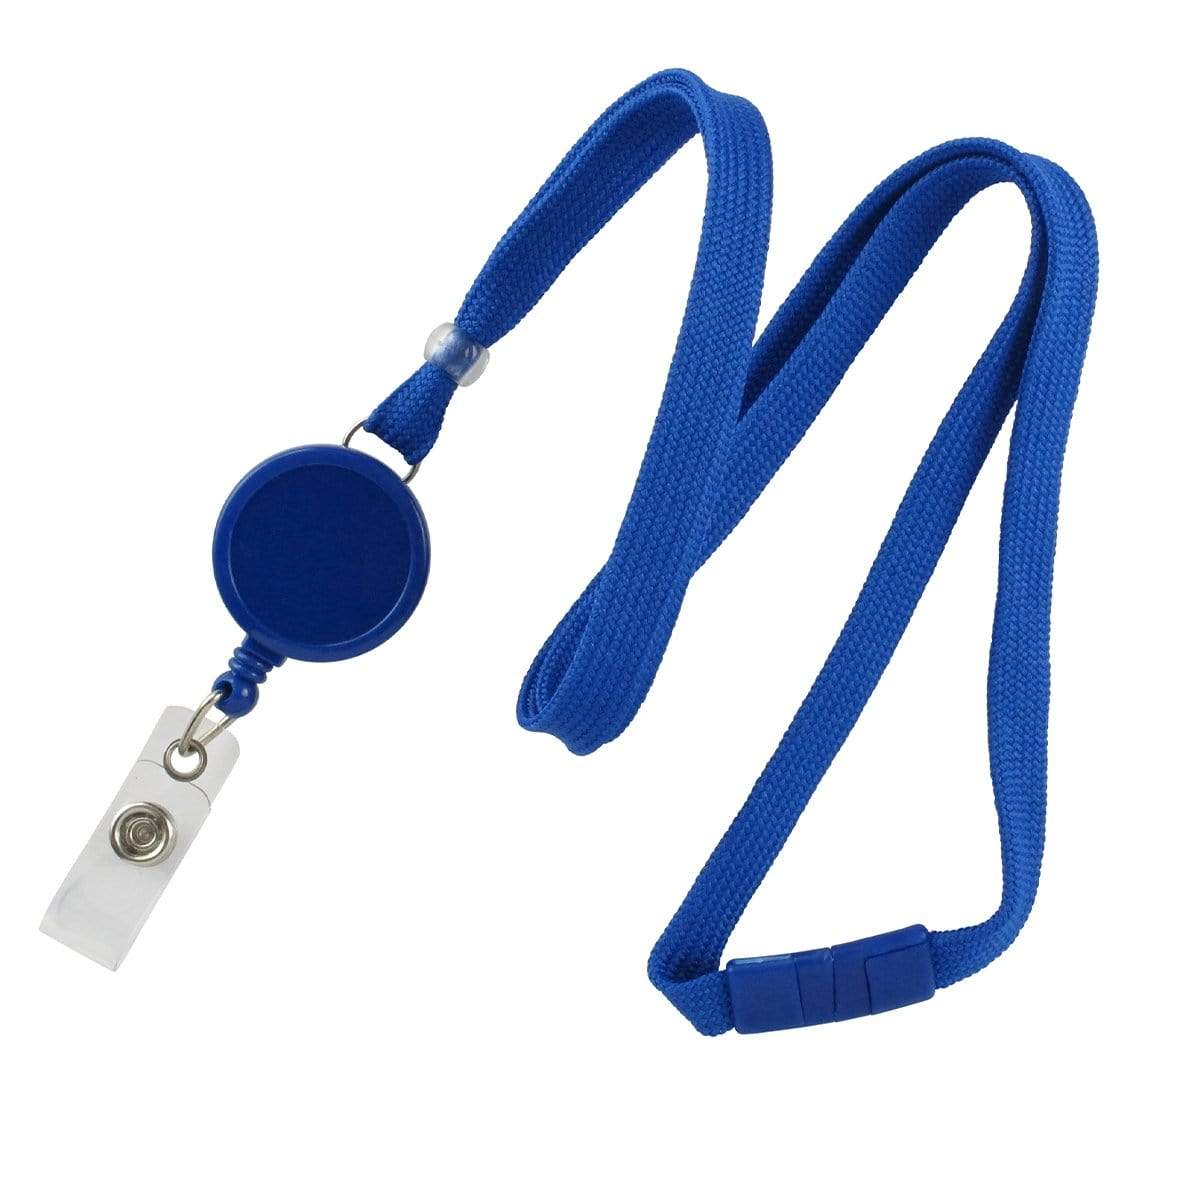 A Breakaway Lanyard ID Holder Badge Reel Combo - Retractable Lanyard (SPID-210X) with an adjustable strap and a retractable badge reel perfect for ID card display.